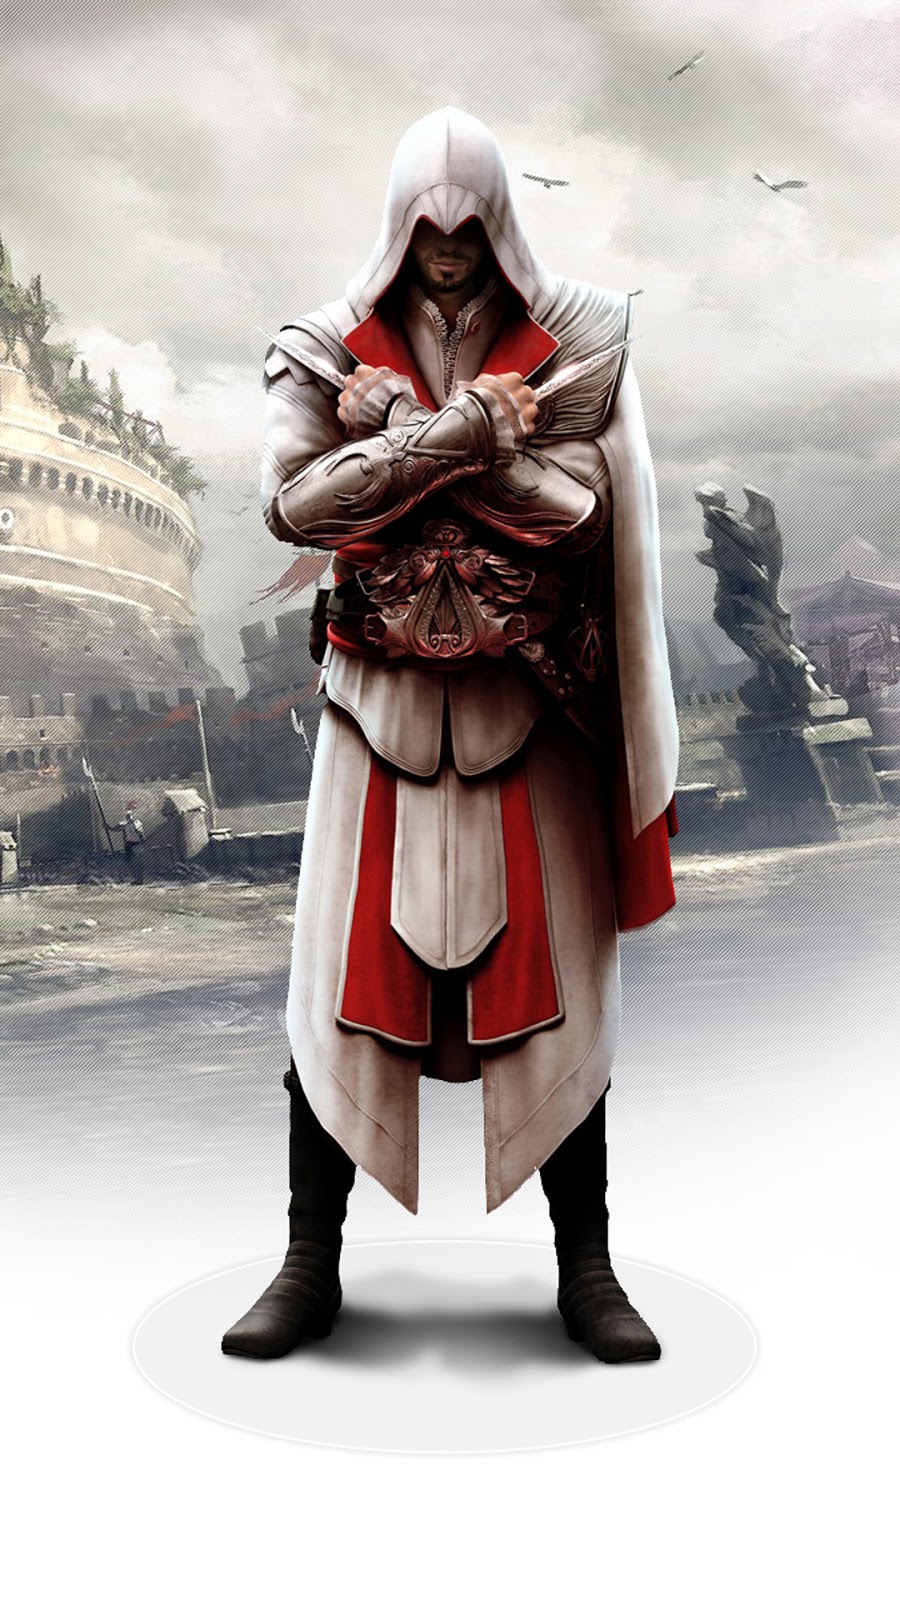 Assassin Creed 4 Hd Wallpaper For Mobile - 900x1600 Wallpaper 